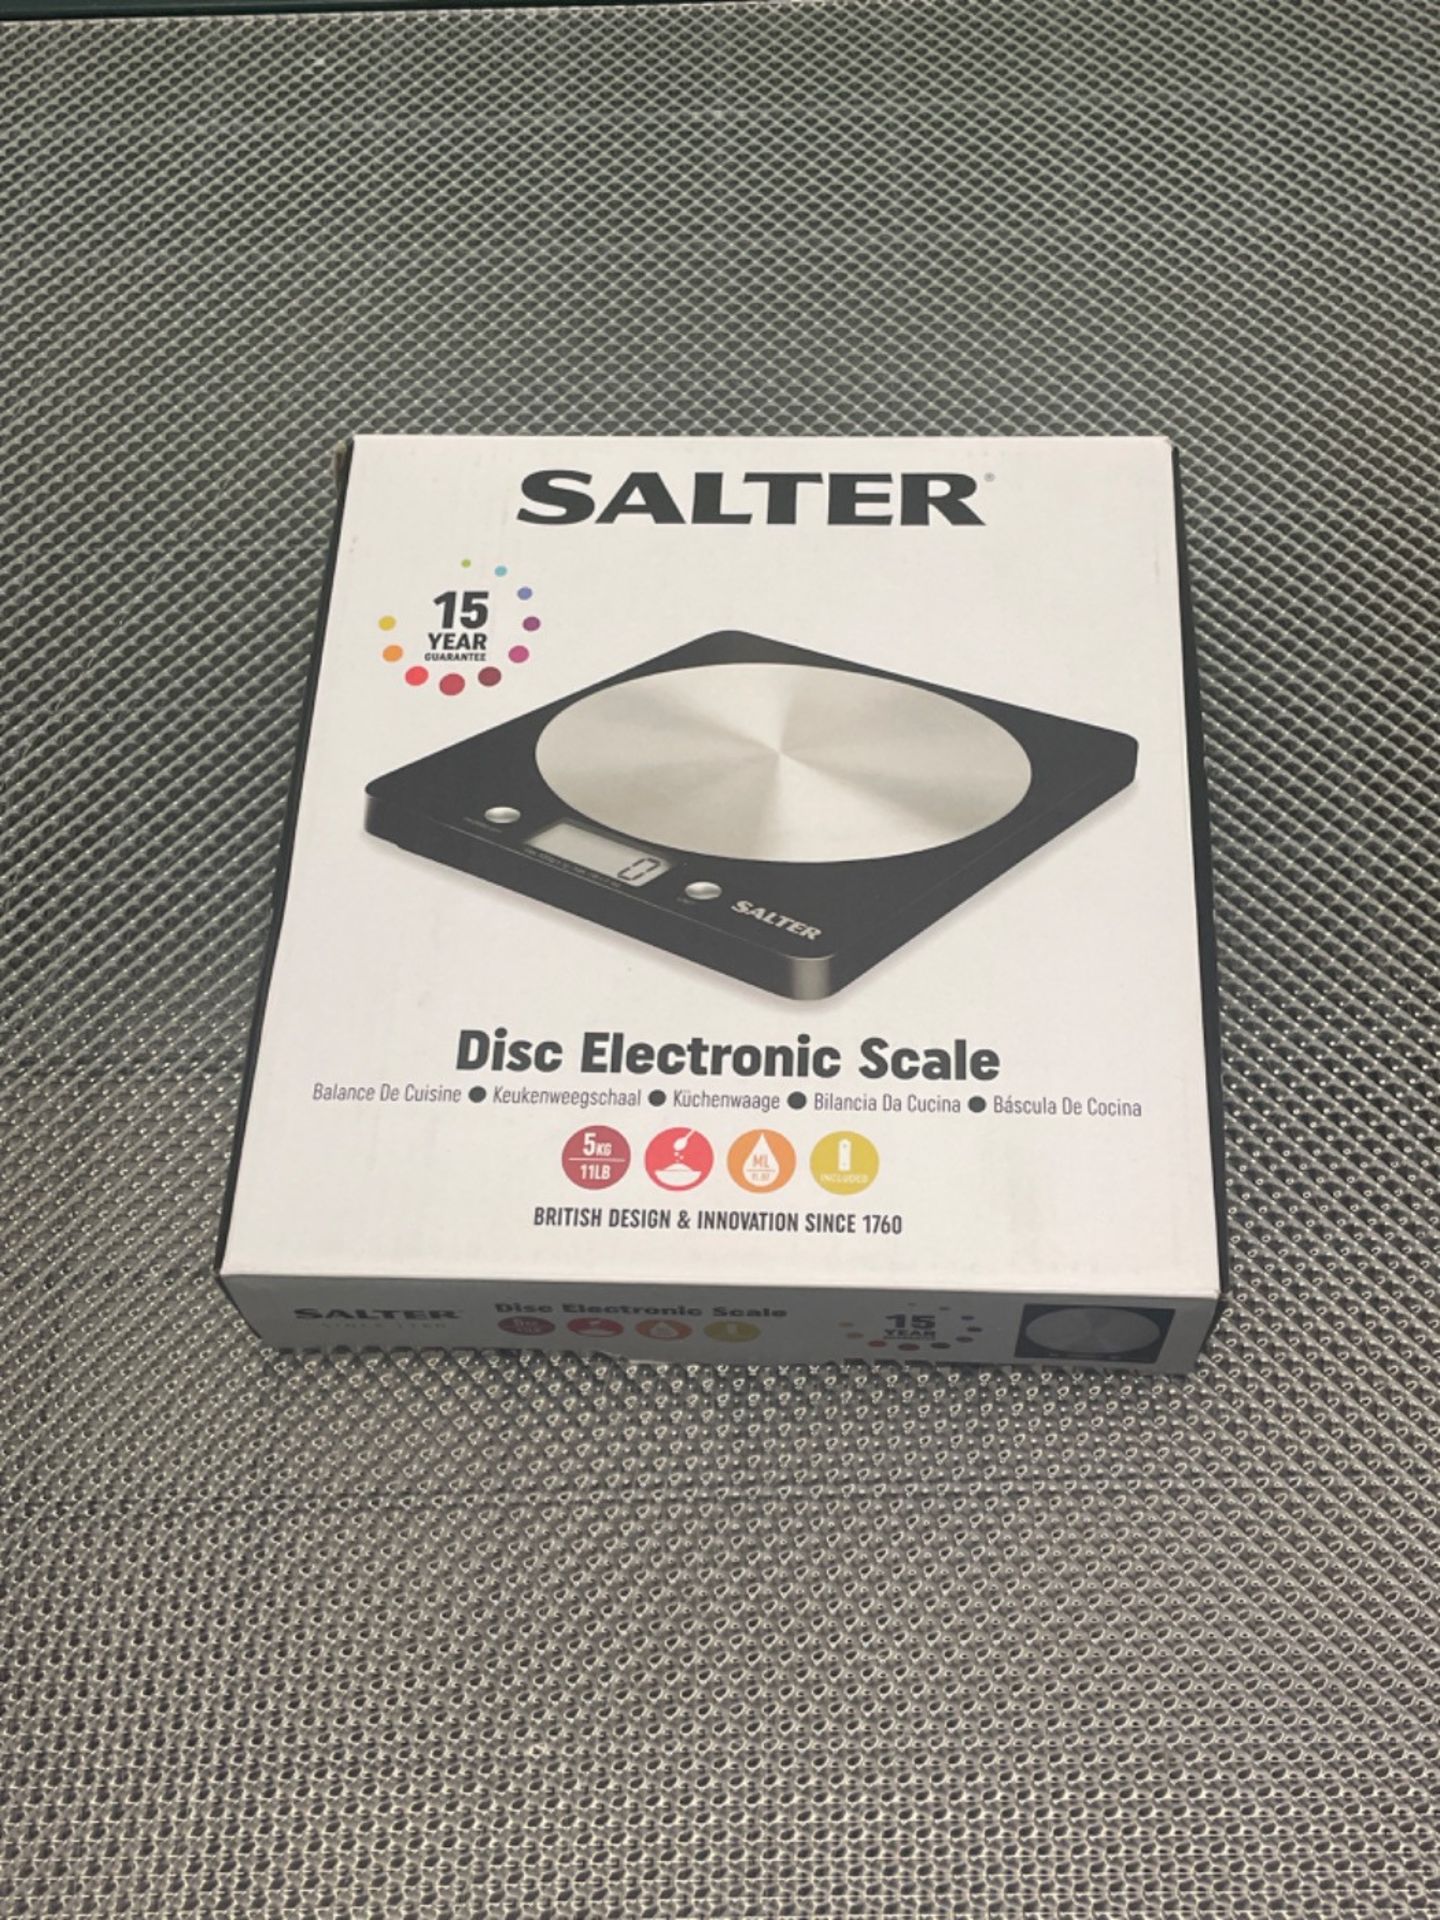 Salter 1036 BKSSDR Electronic Kitchen Scale €“ Digital Baking Scale with 5kg Capacity, Food Weighi - Image 3 of 3